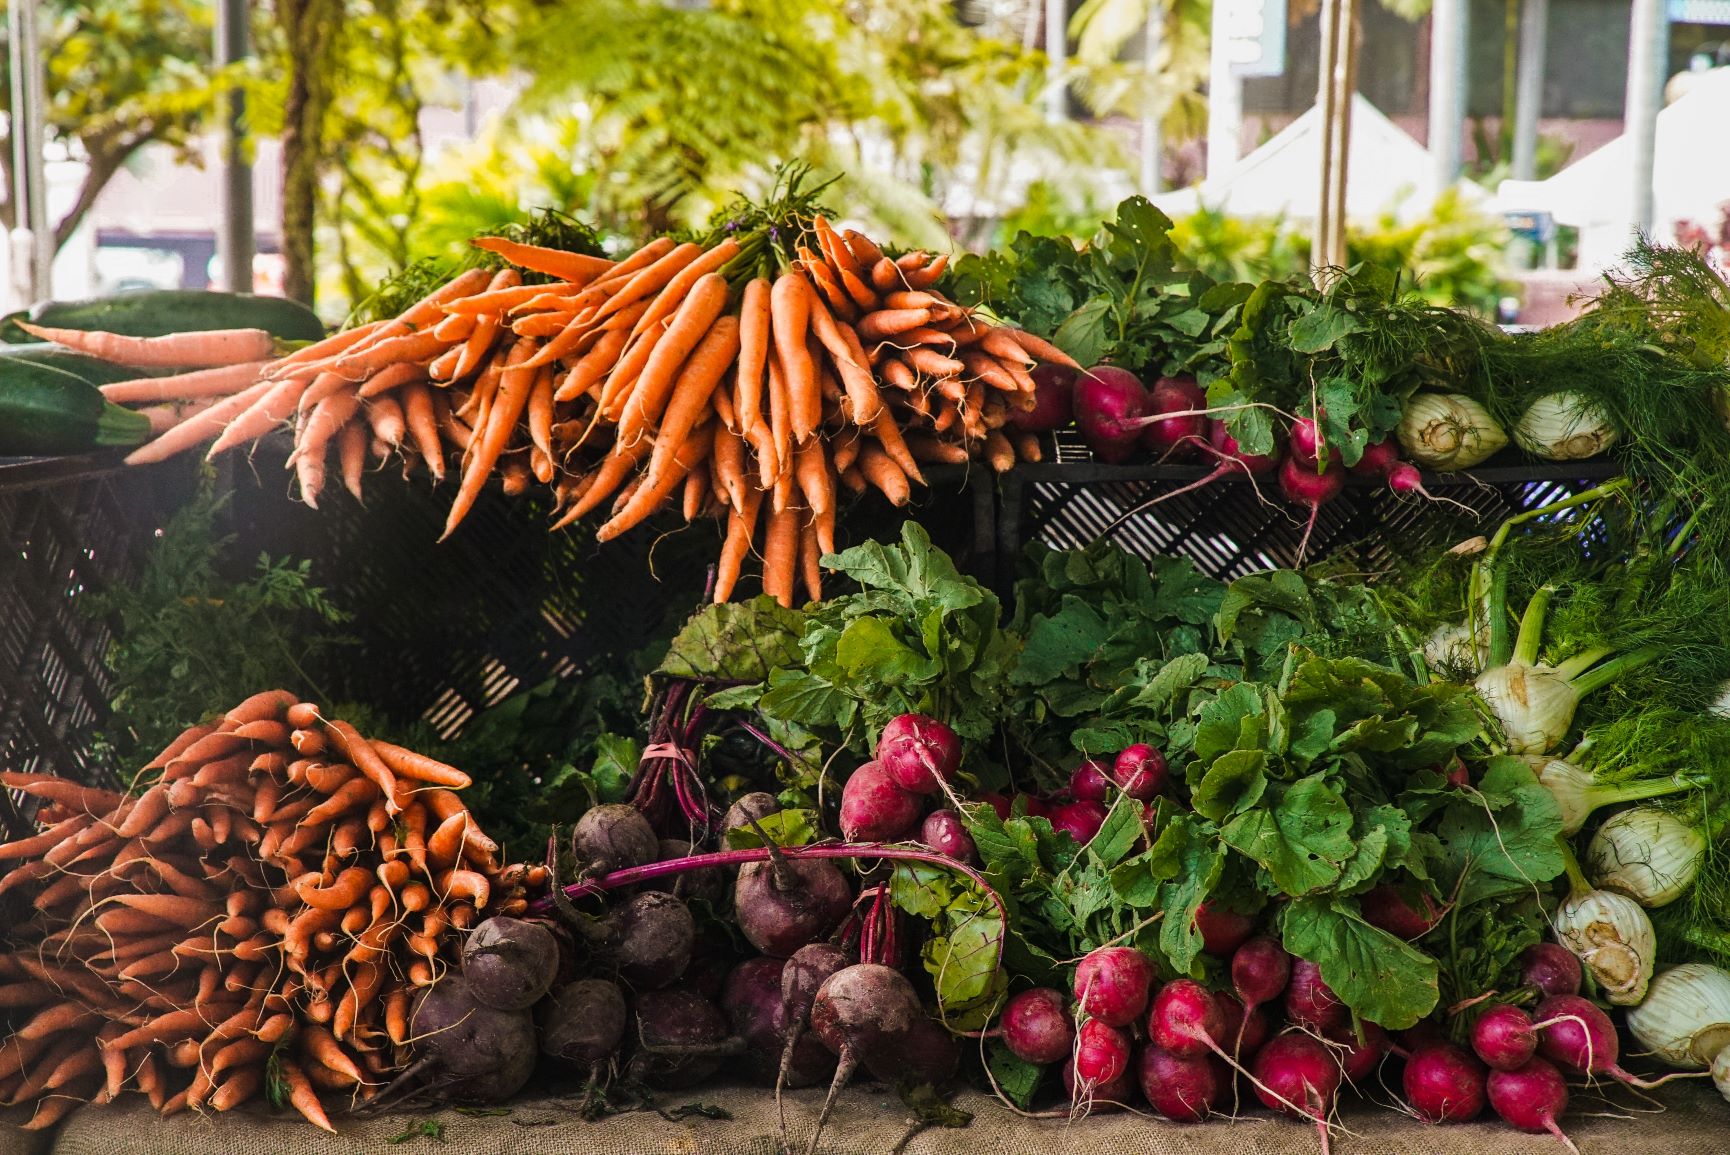 Carrots, radishes, and beets on display at a local farmers market